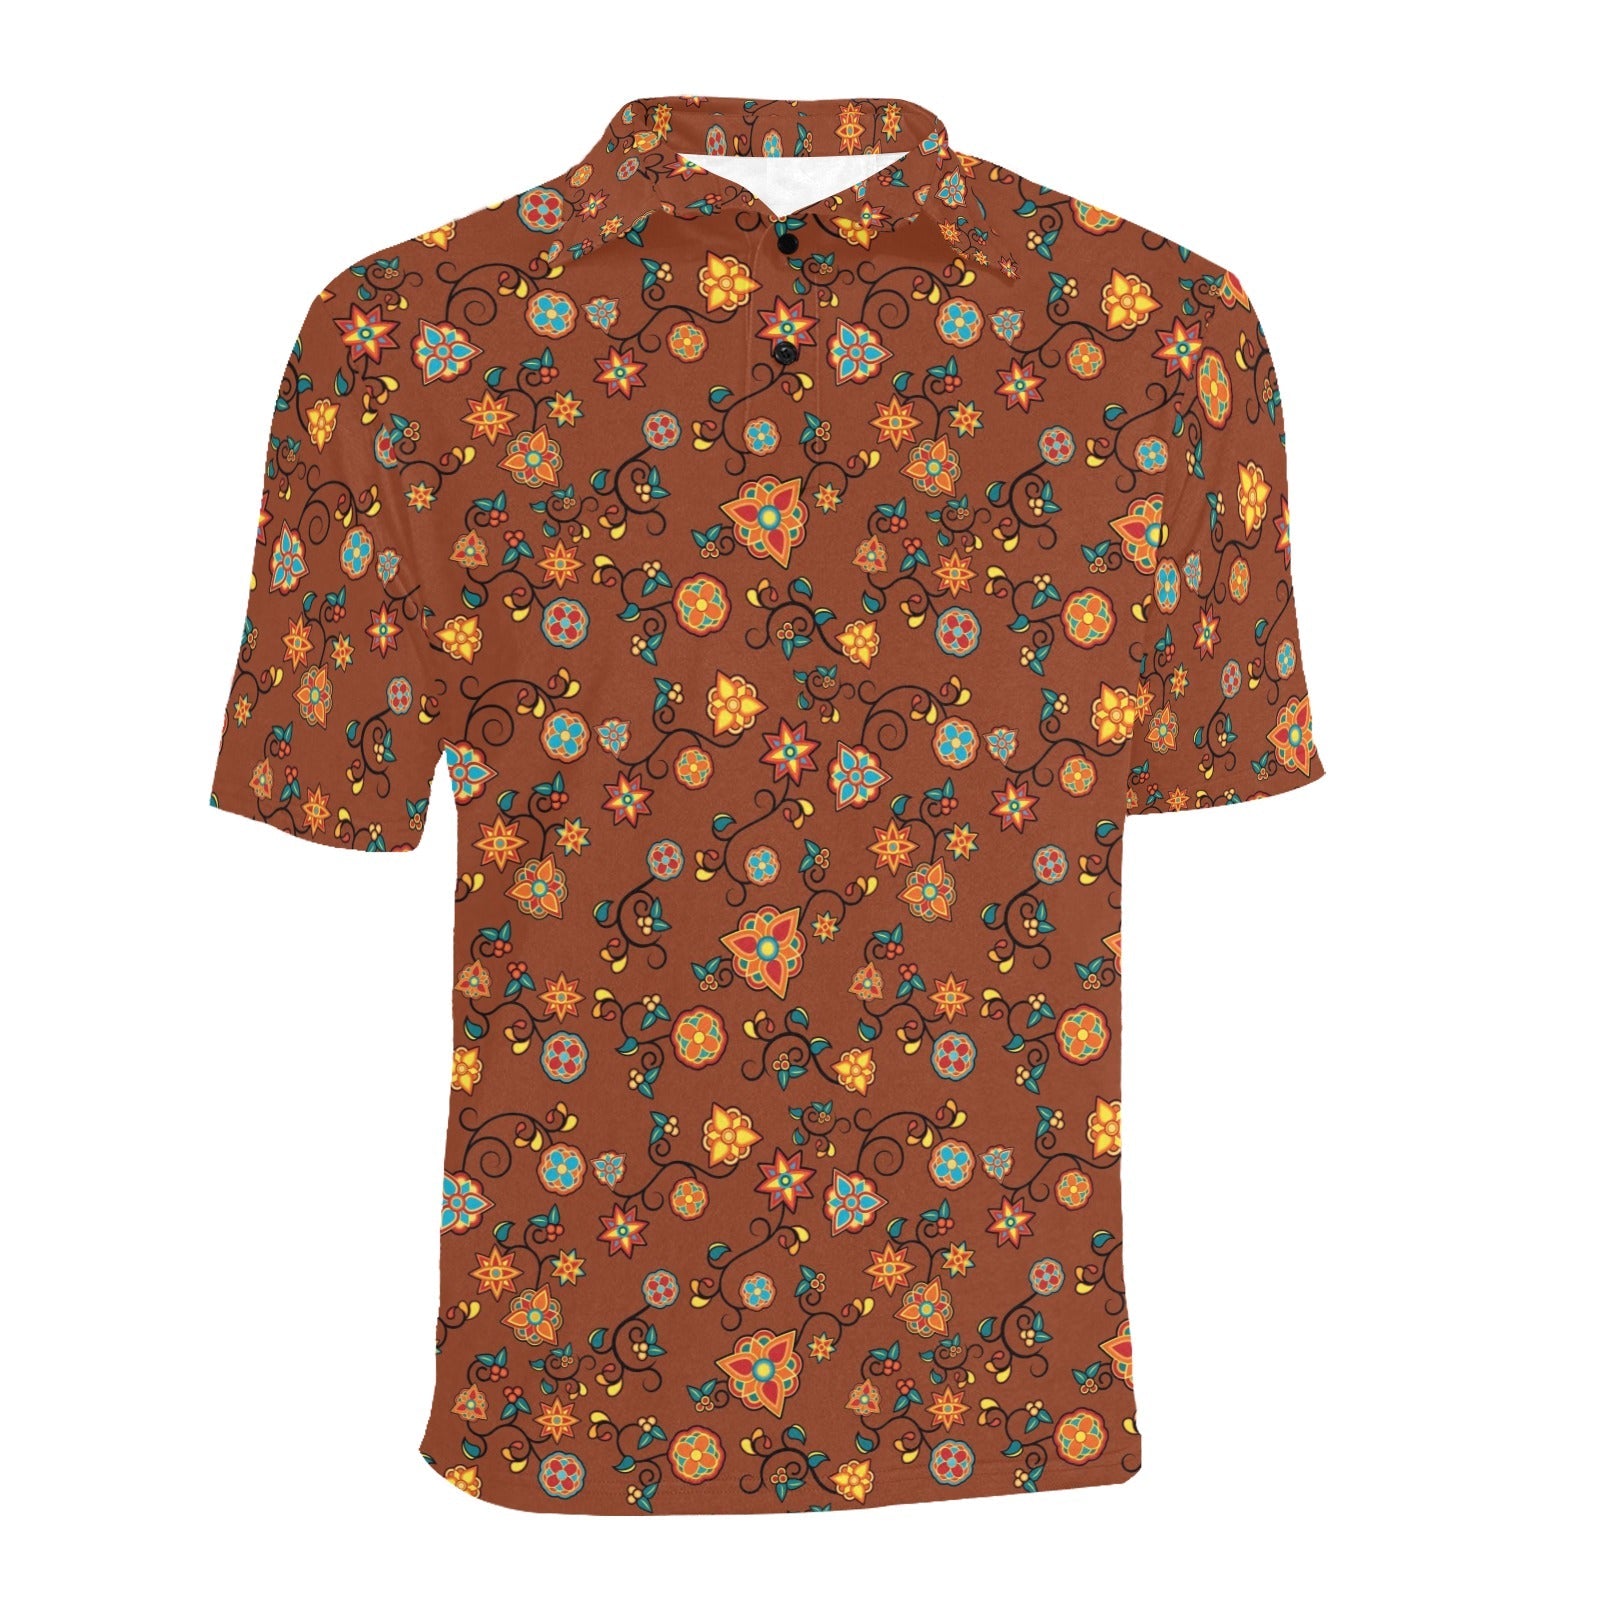 Fire Bloom Shade Men's All Over Print Polo Shirt (Model T55) Men's Polo Shirt (Model T55) e-joyer 